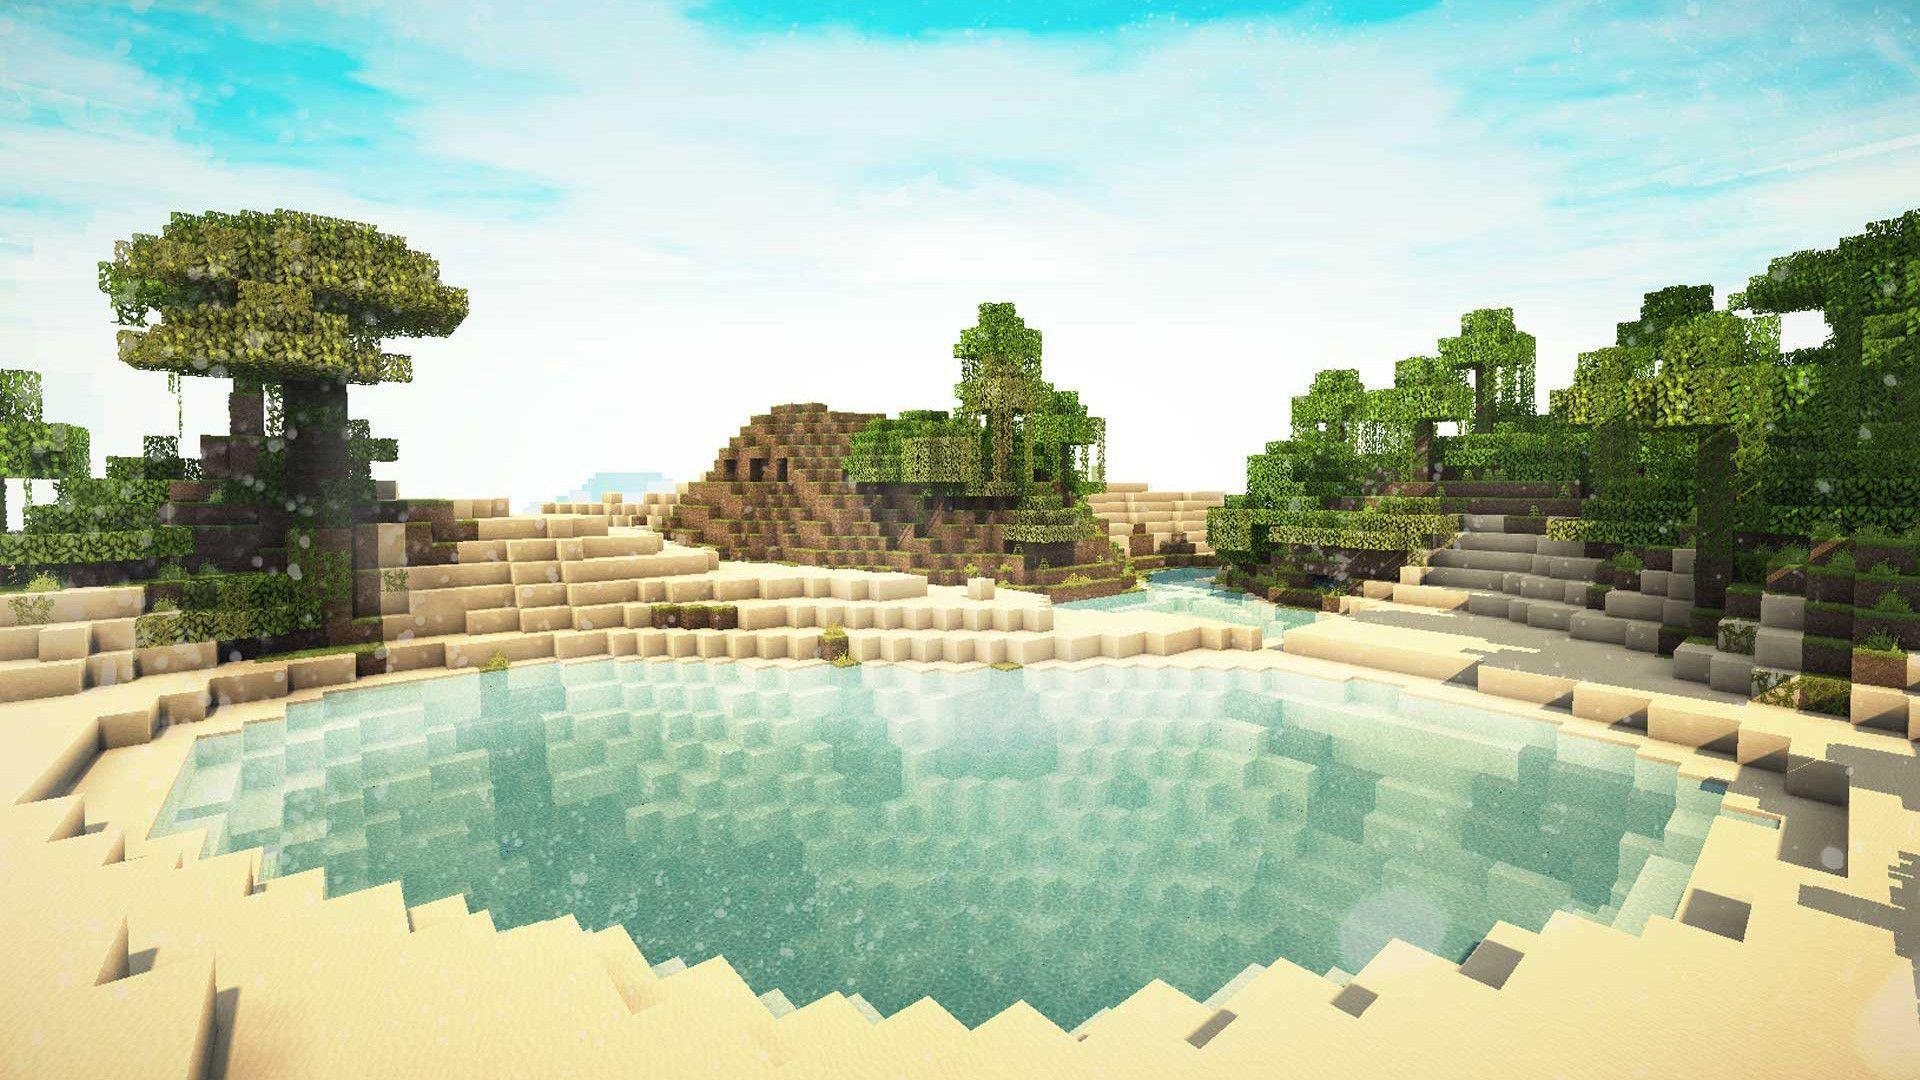 minecraft world backgrounds Wallpapers